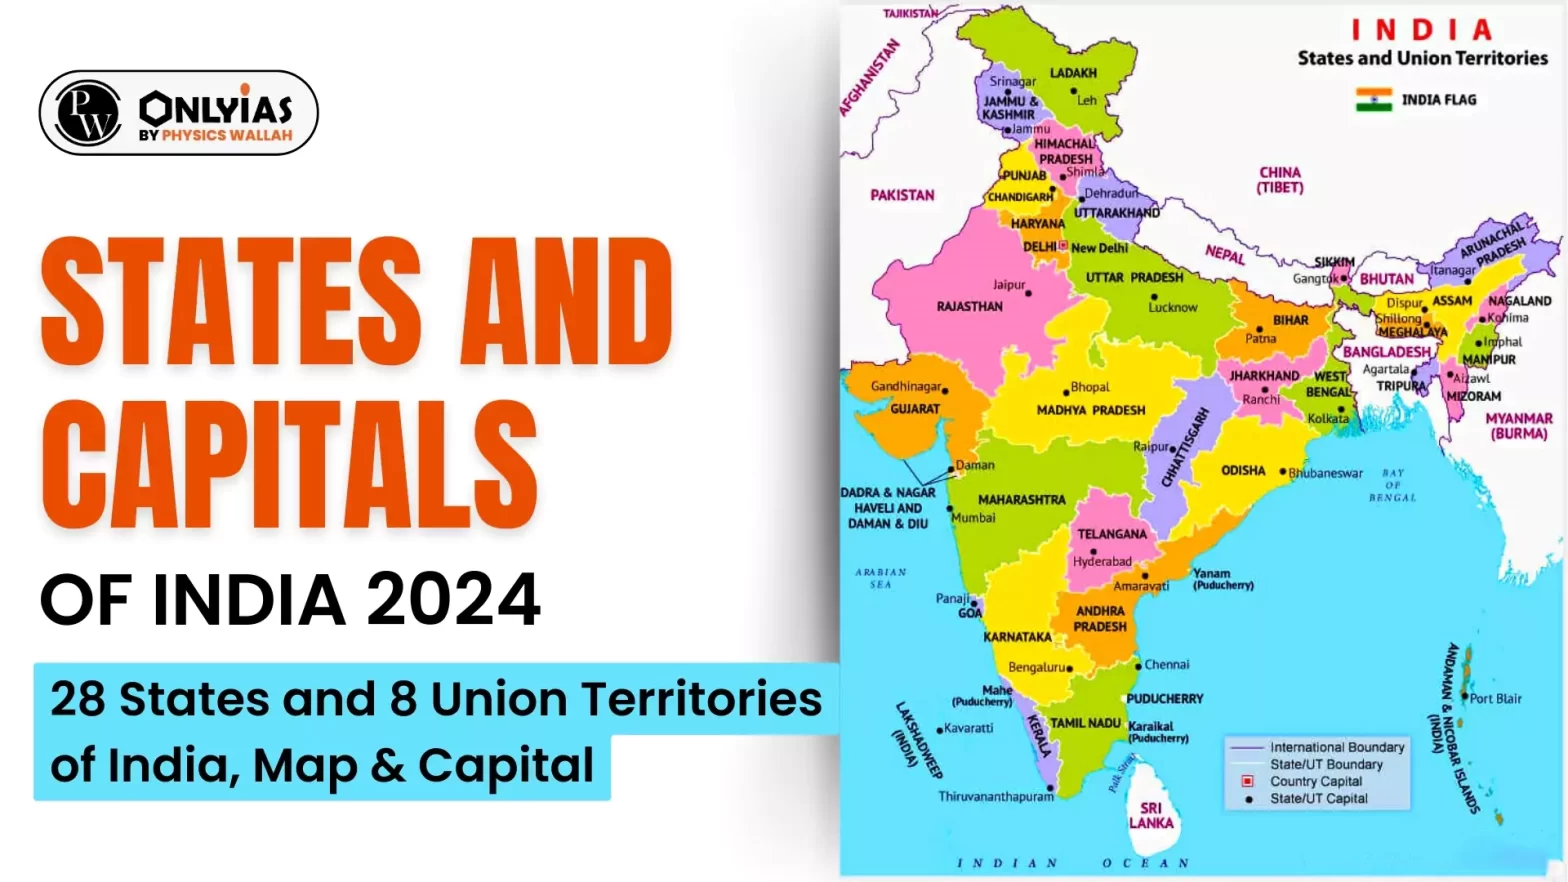 States And Capitals Of India 2024 28 States And 8 Union Territories Of India Map Capital 65cb10495b677 1568x882.webp